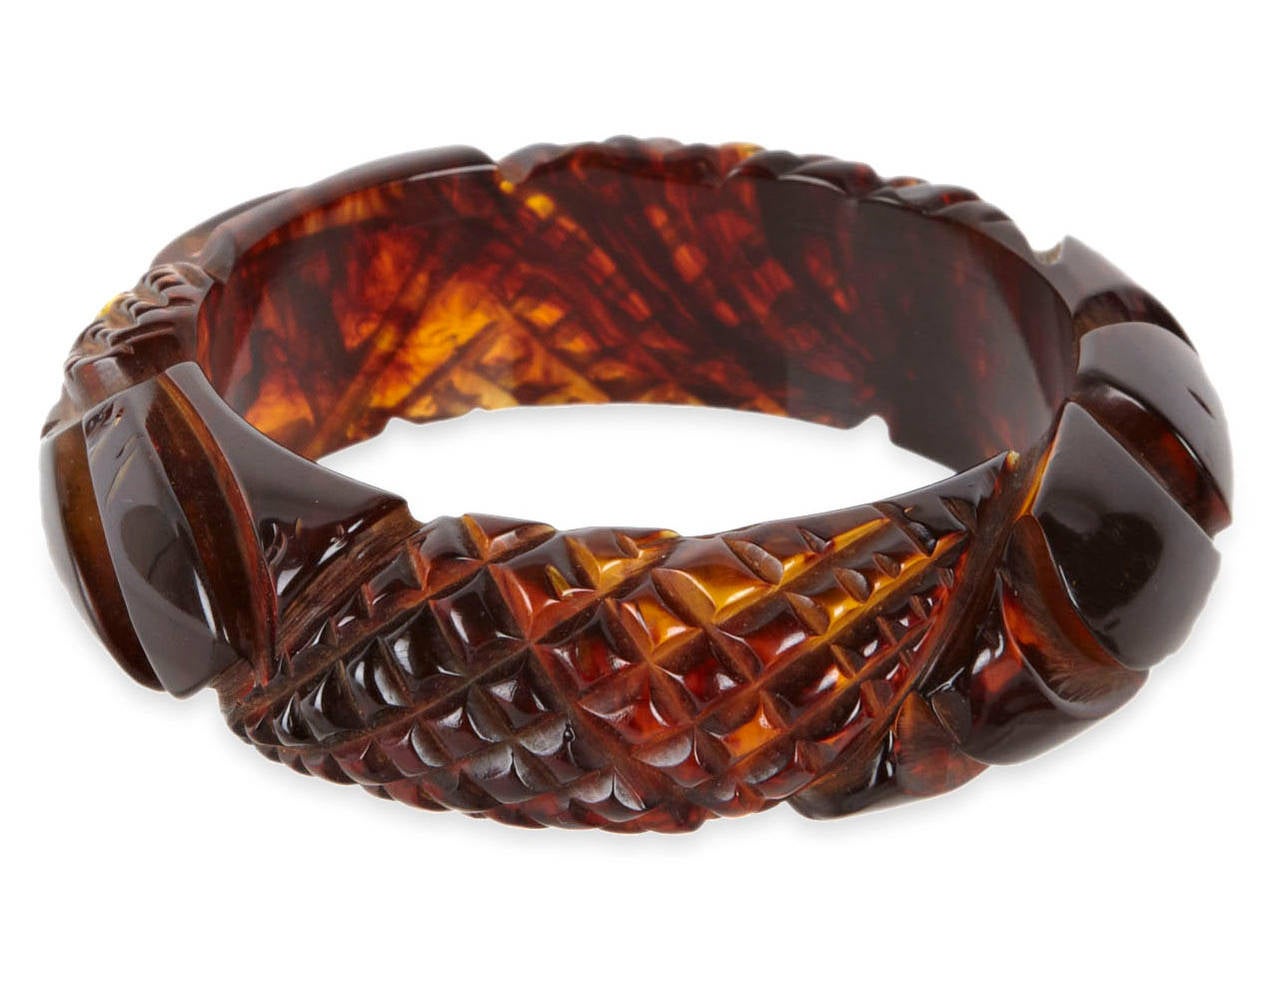 Thick and densely carved tortoise/root beer bakelite bangle circa 1930's. Floral and crosshatch motifs. 1